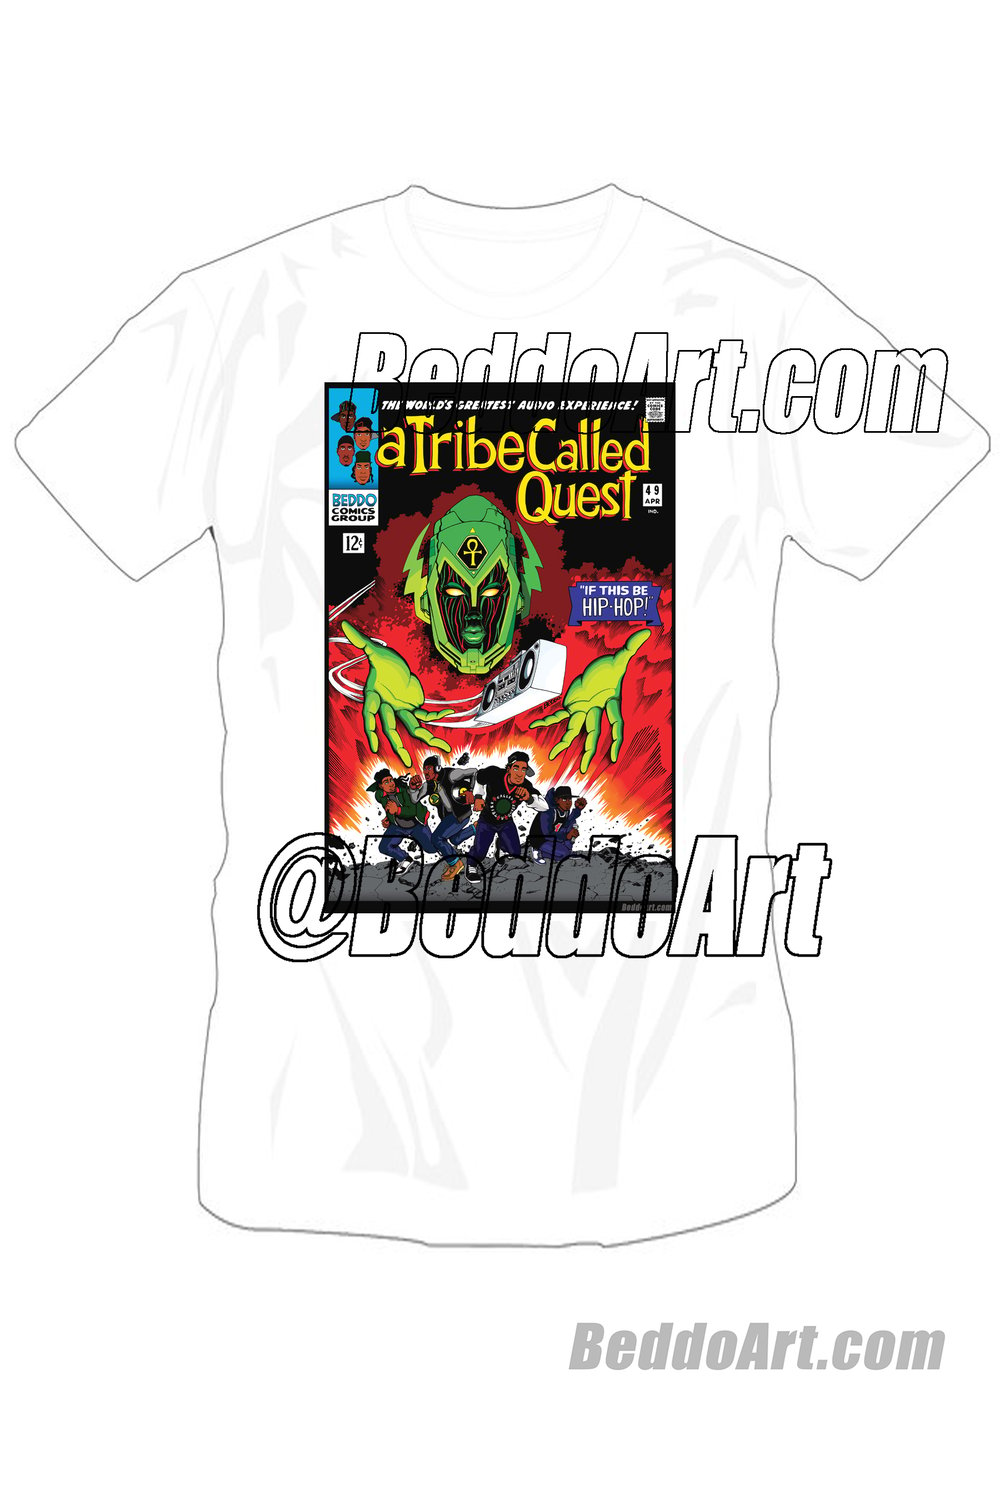 Tribe #49 Comic Book Cover by Beddo; T-Shirt